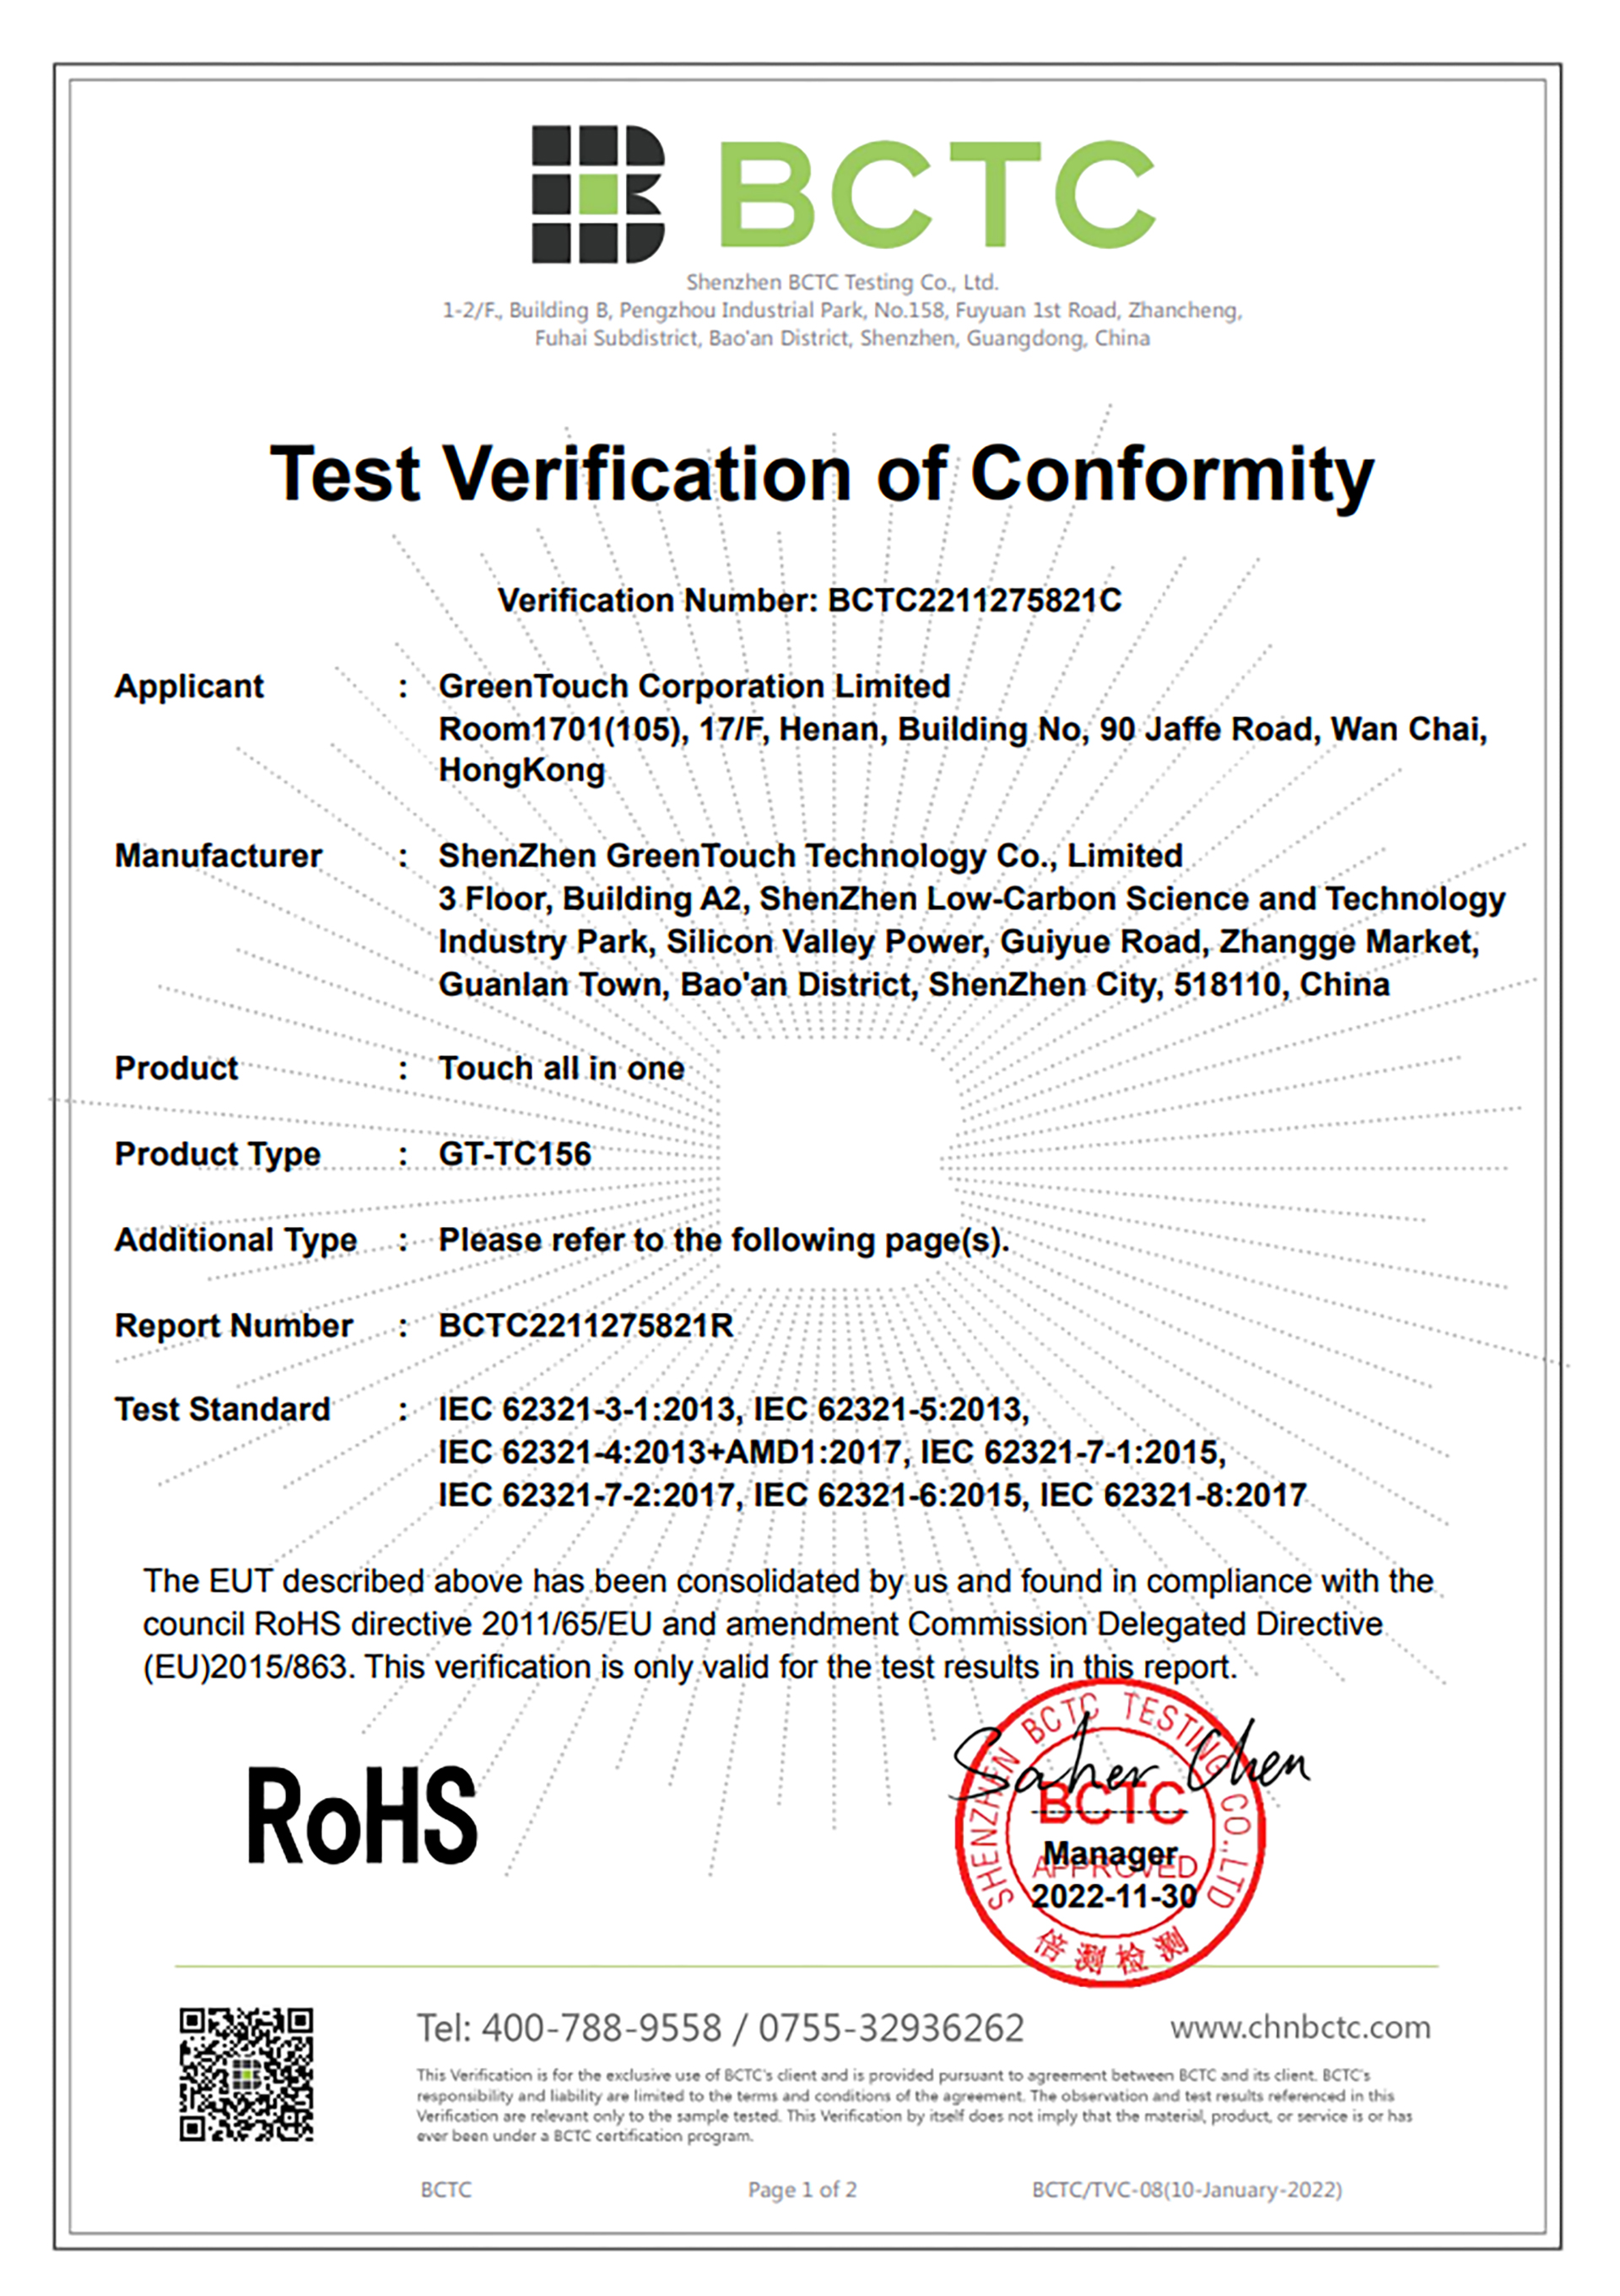 Certificate of RoHS